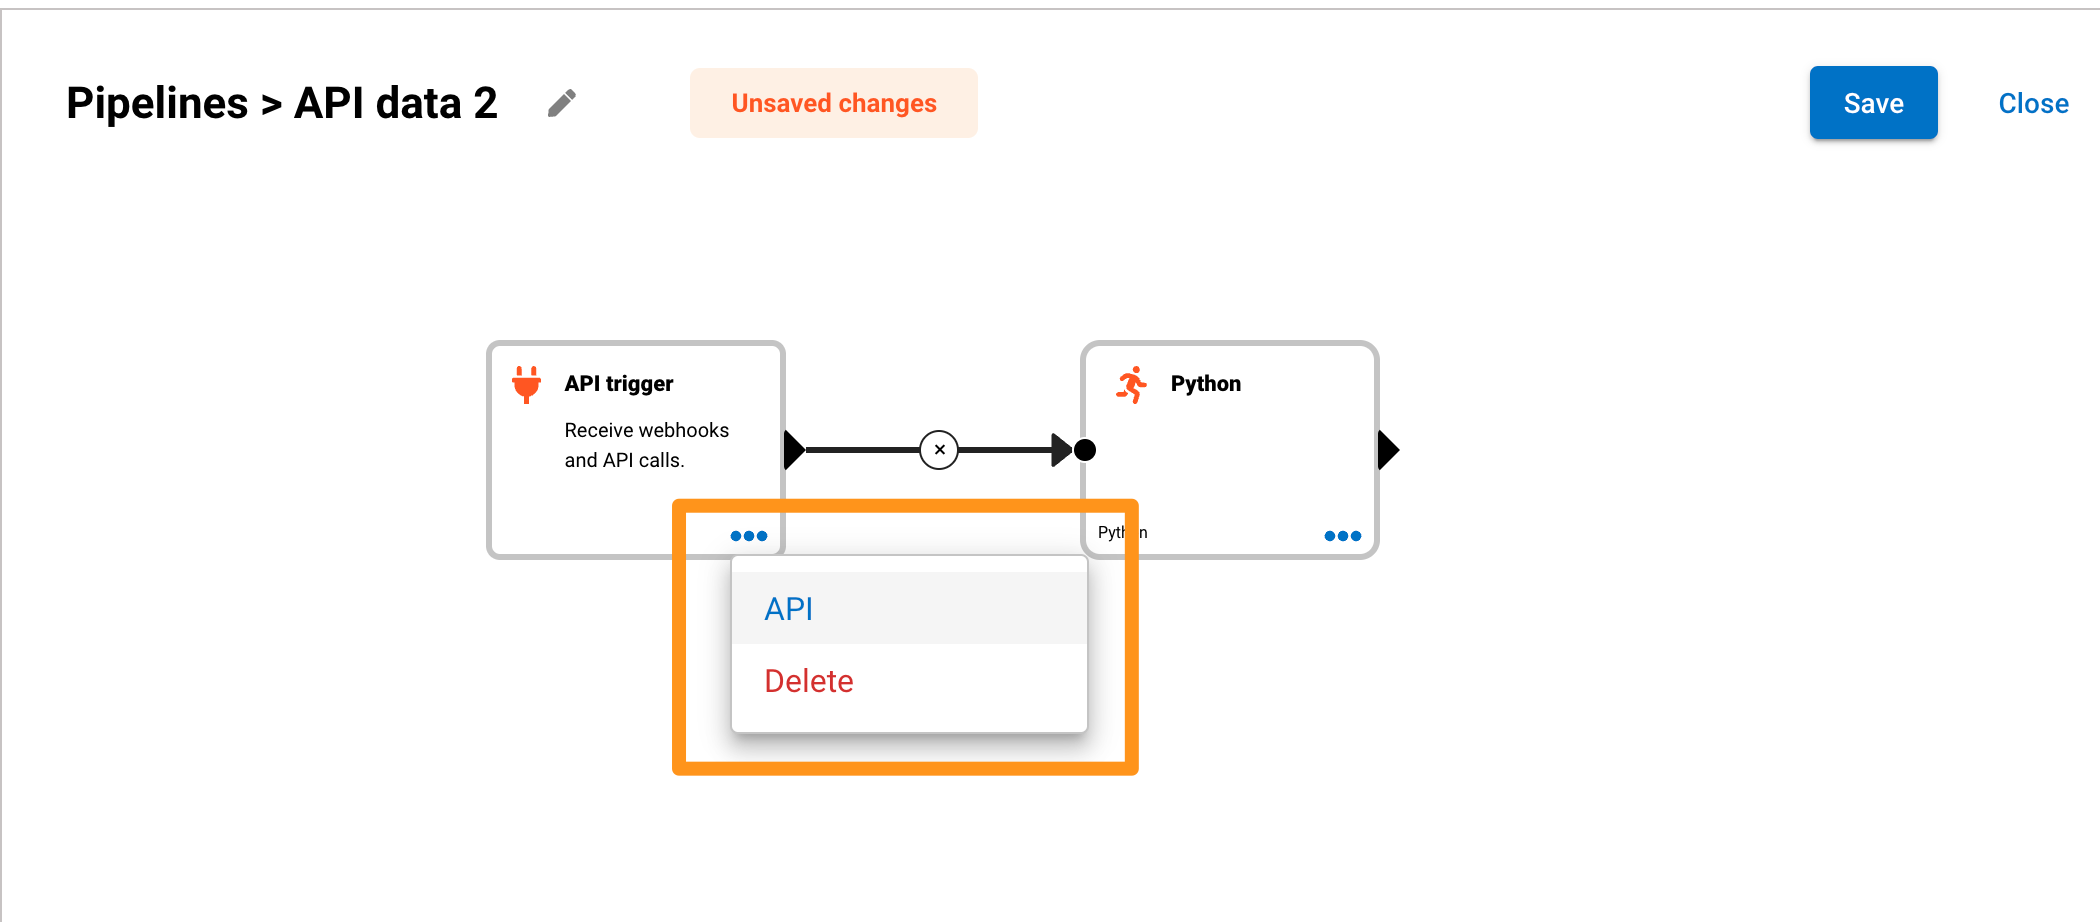 Configuring the API trigger for a data pipeline